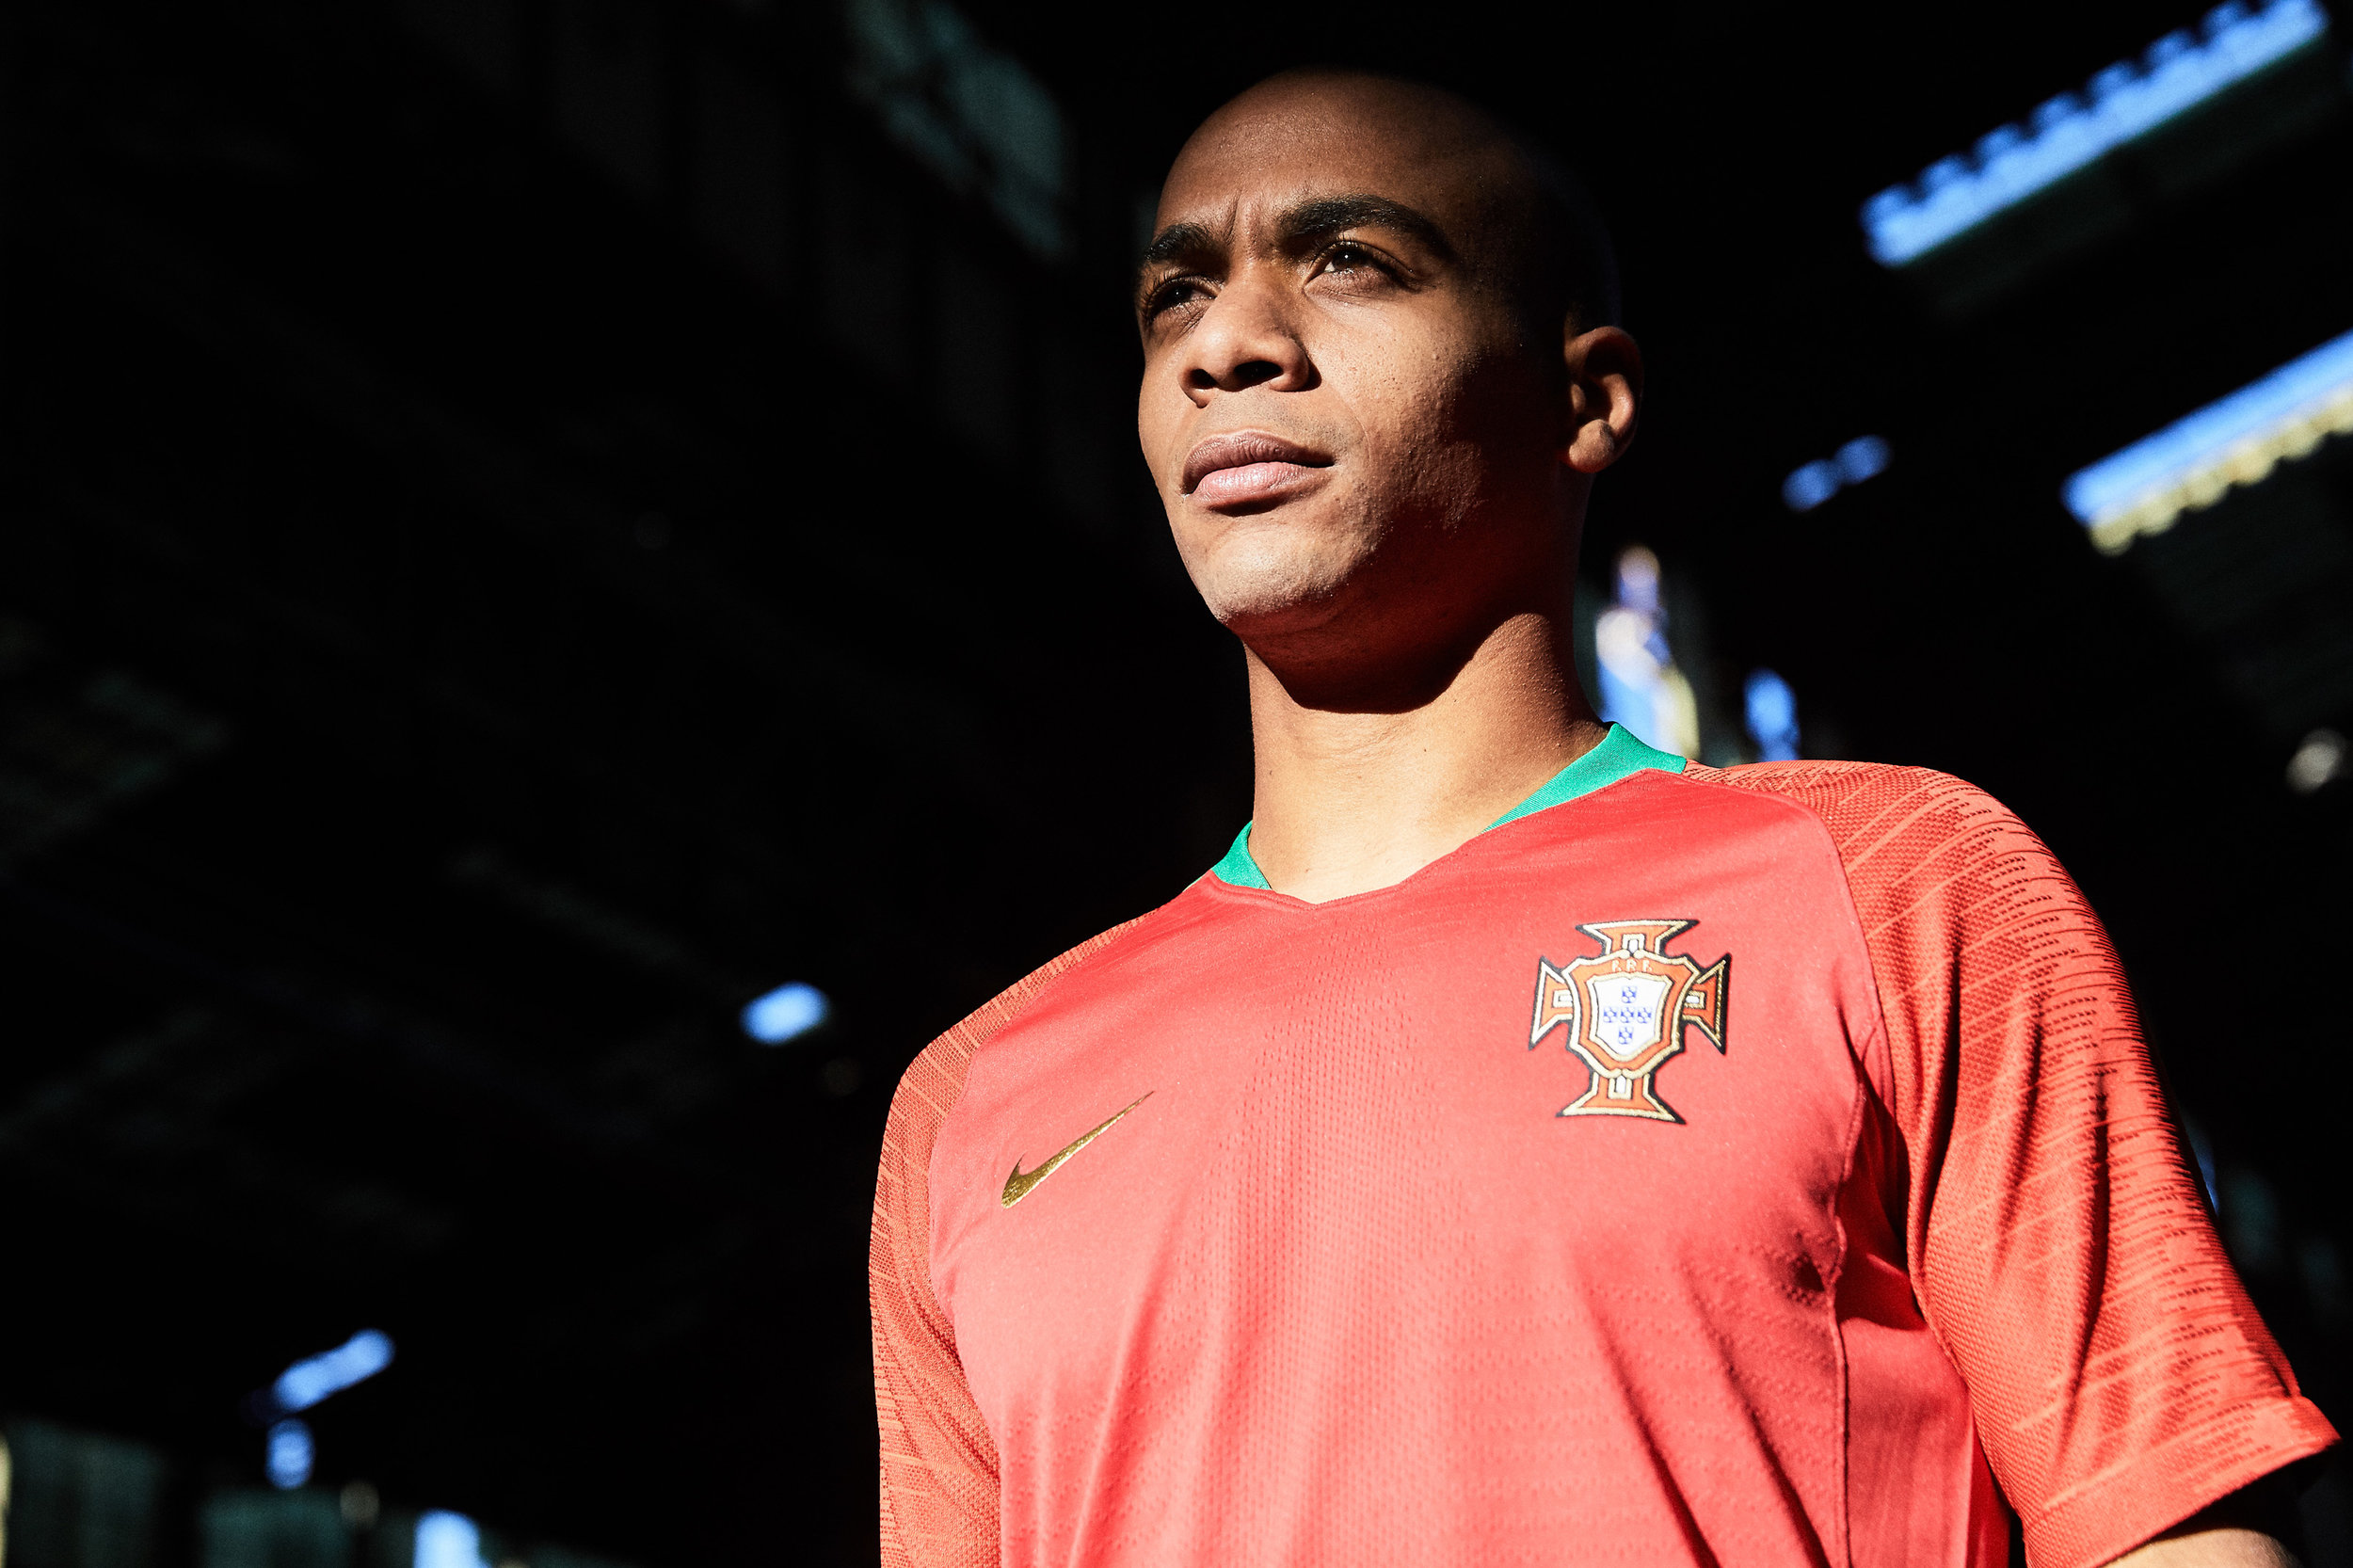 Nike_News_2018_Portuguese_Football_Federation_Collection_3_78121.jpg